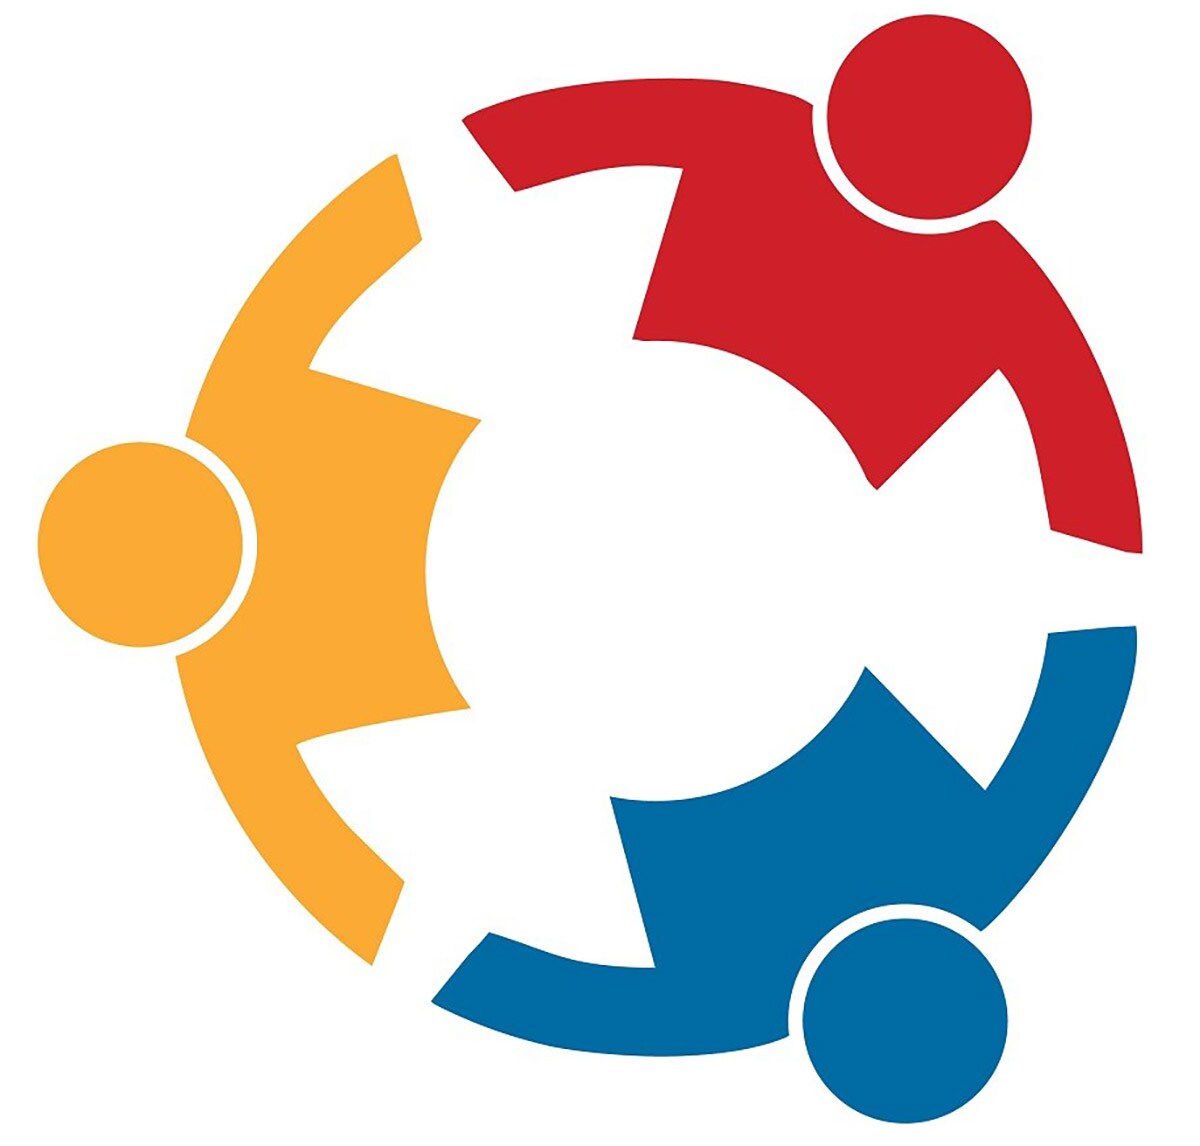 yellow red and blue human symbols in a circle with arms outstretched symbolizing collaboration